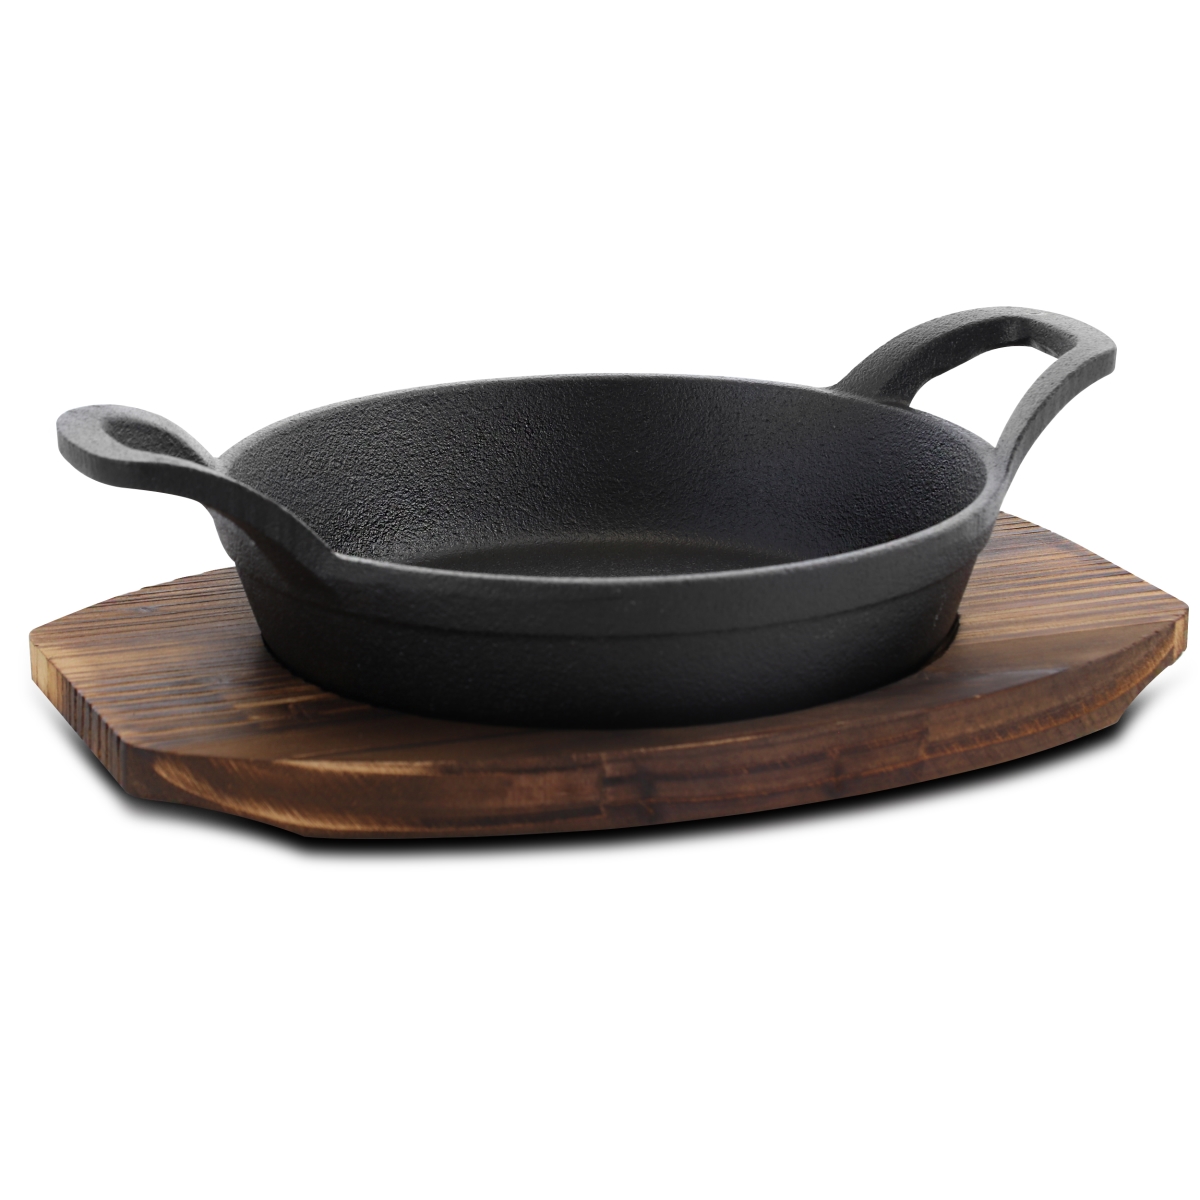 Picture of General Store 124971.02 7 in. Addlestone Pre-seasoned Oval Cast Iron Server with Burned Furwood Base - 2 Piece